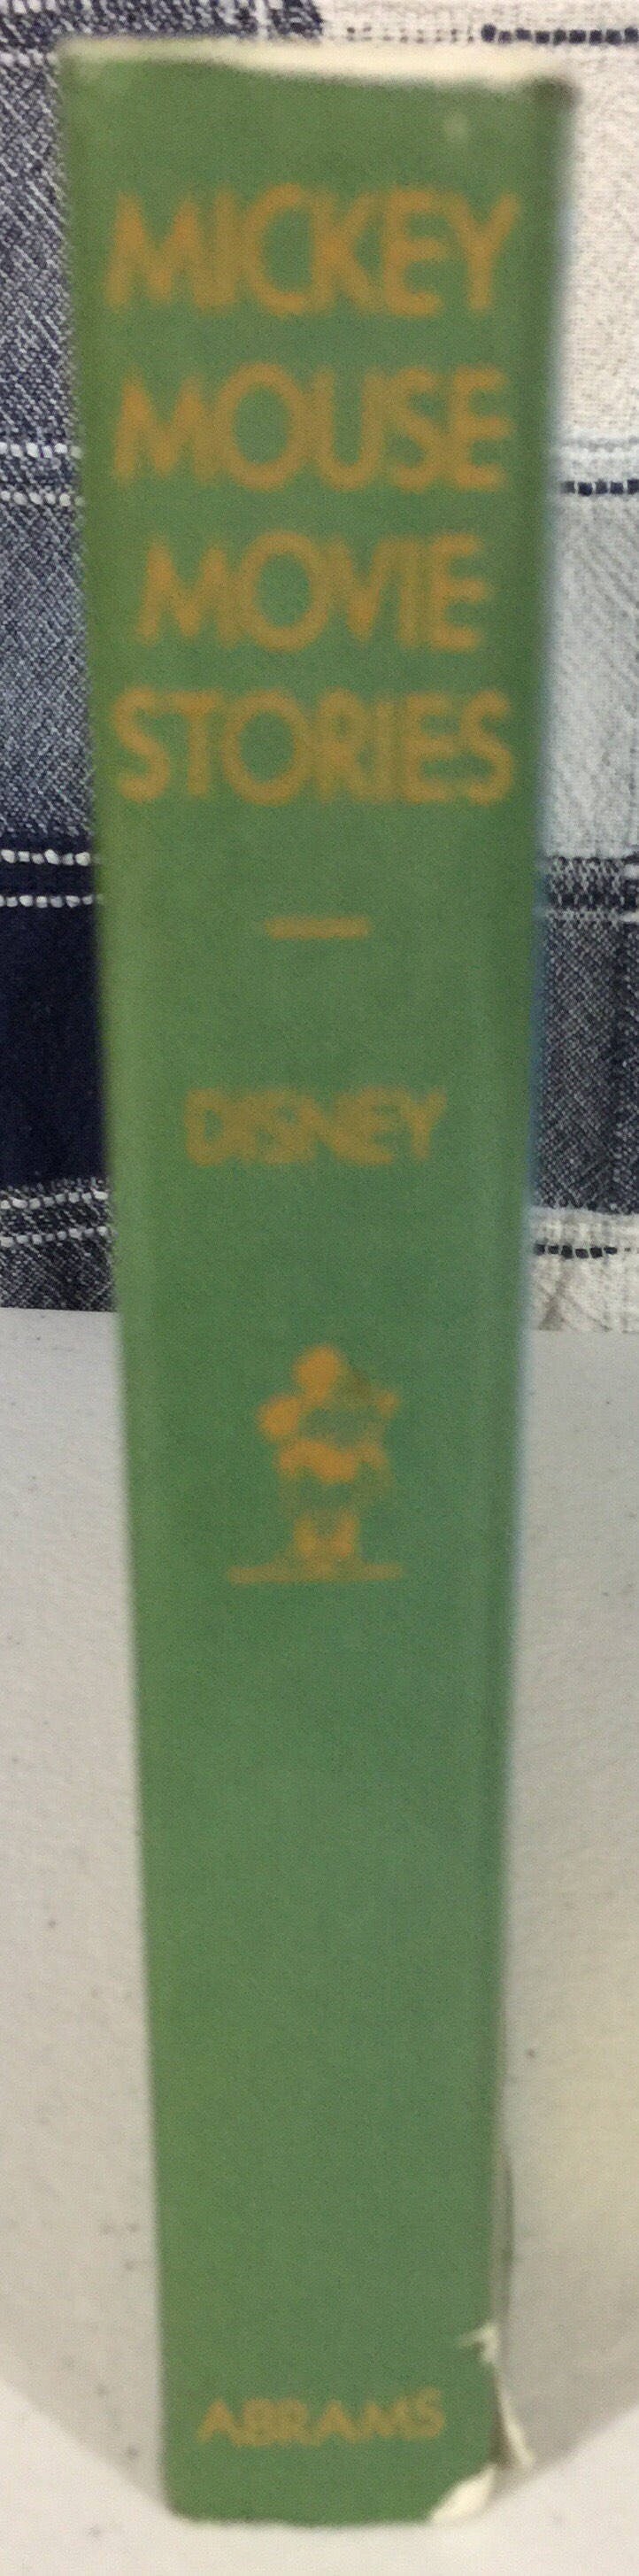 Disney’s, Mickey Mouse movie stories introduction by Marice Sendak, Vintage Collectible Book